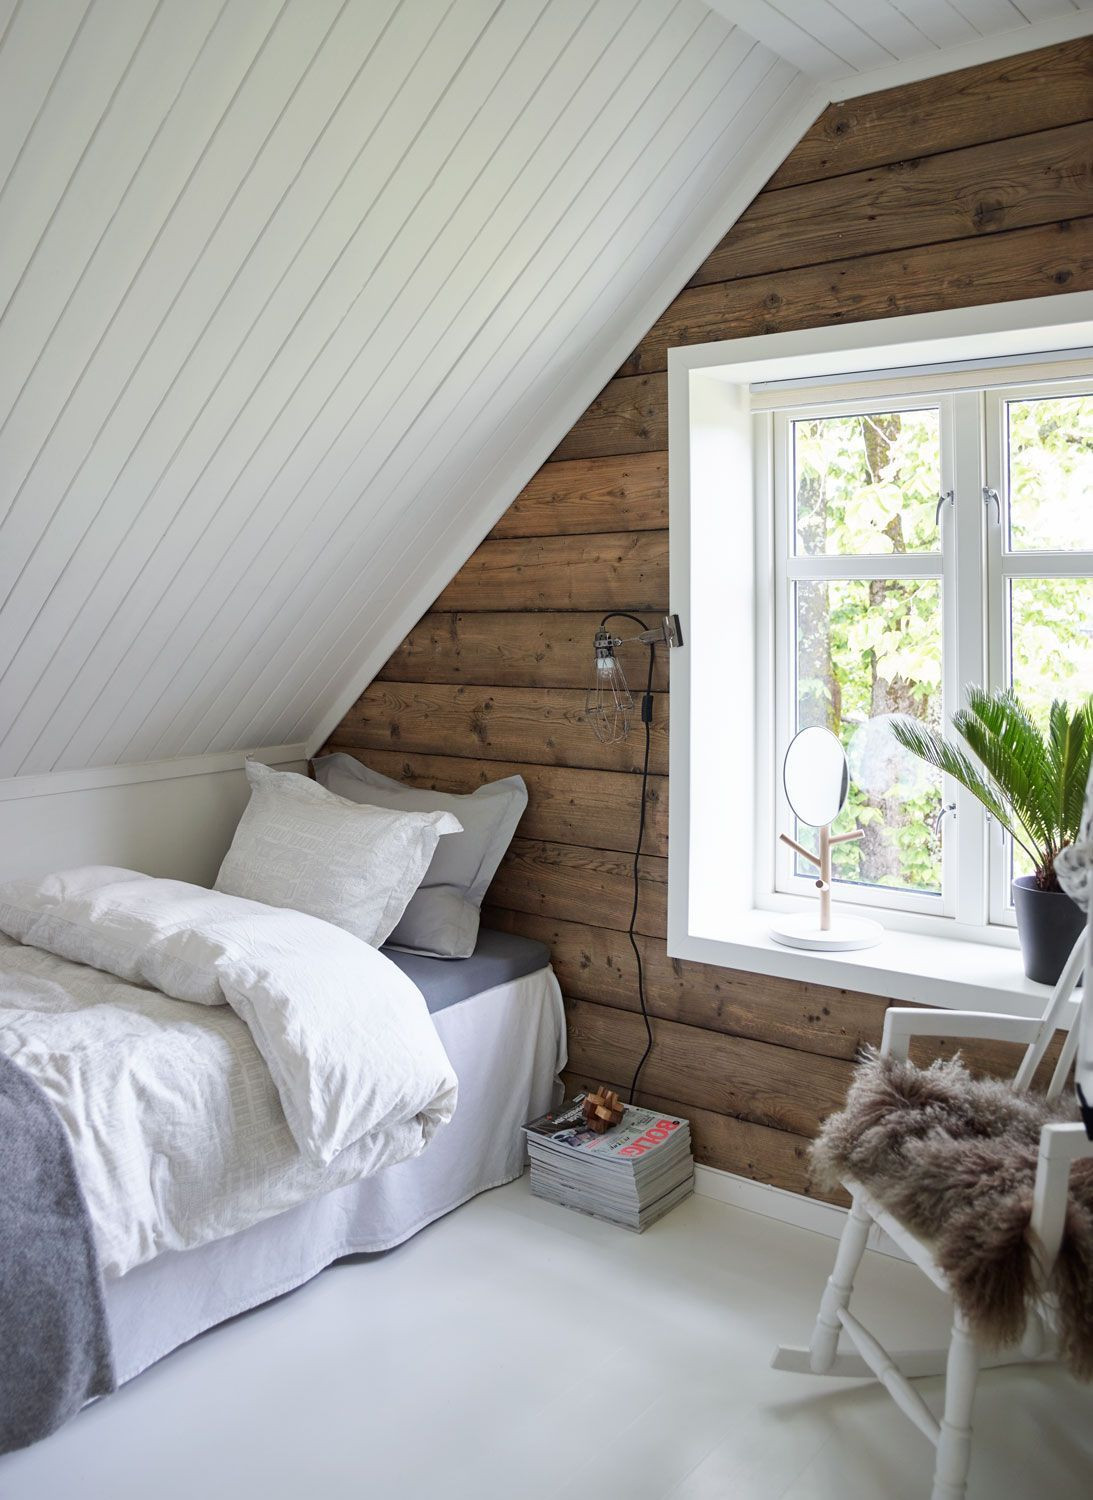 Small Attic Bedroom Sloping Ceilings
 Attic Bedroom Ideas and Designs Must You Need To Know